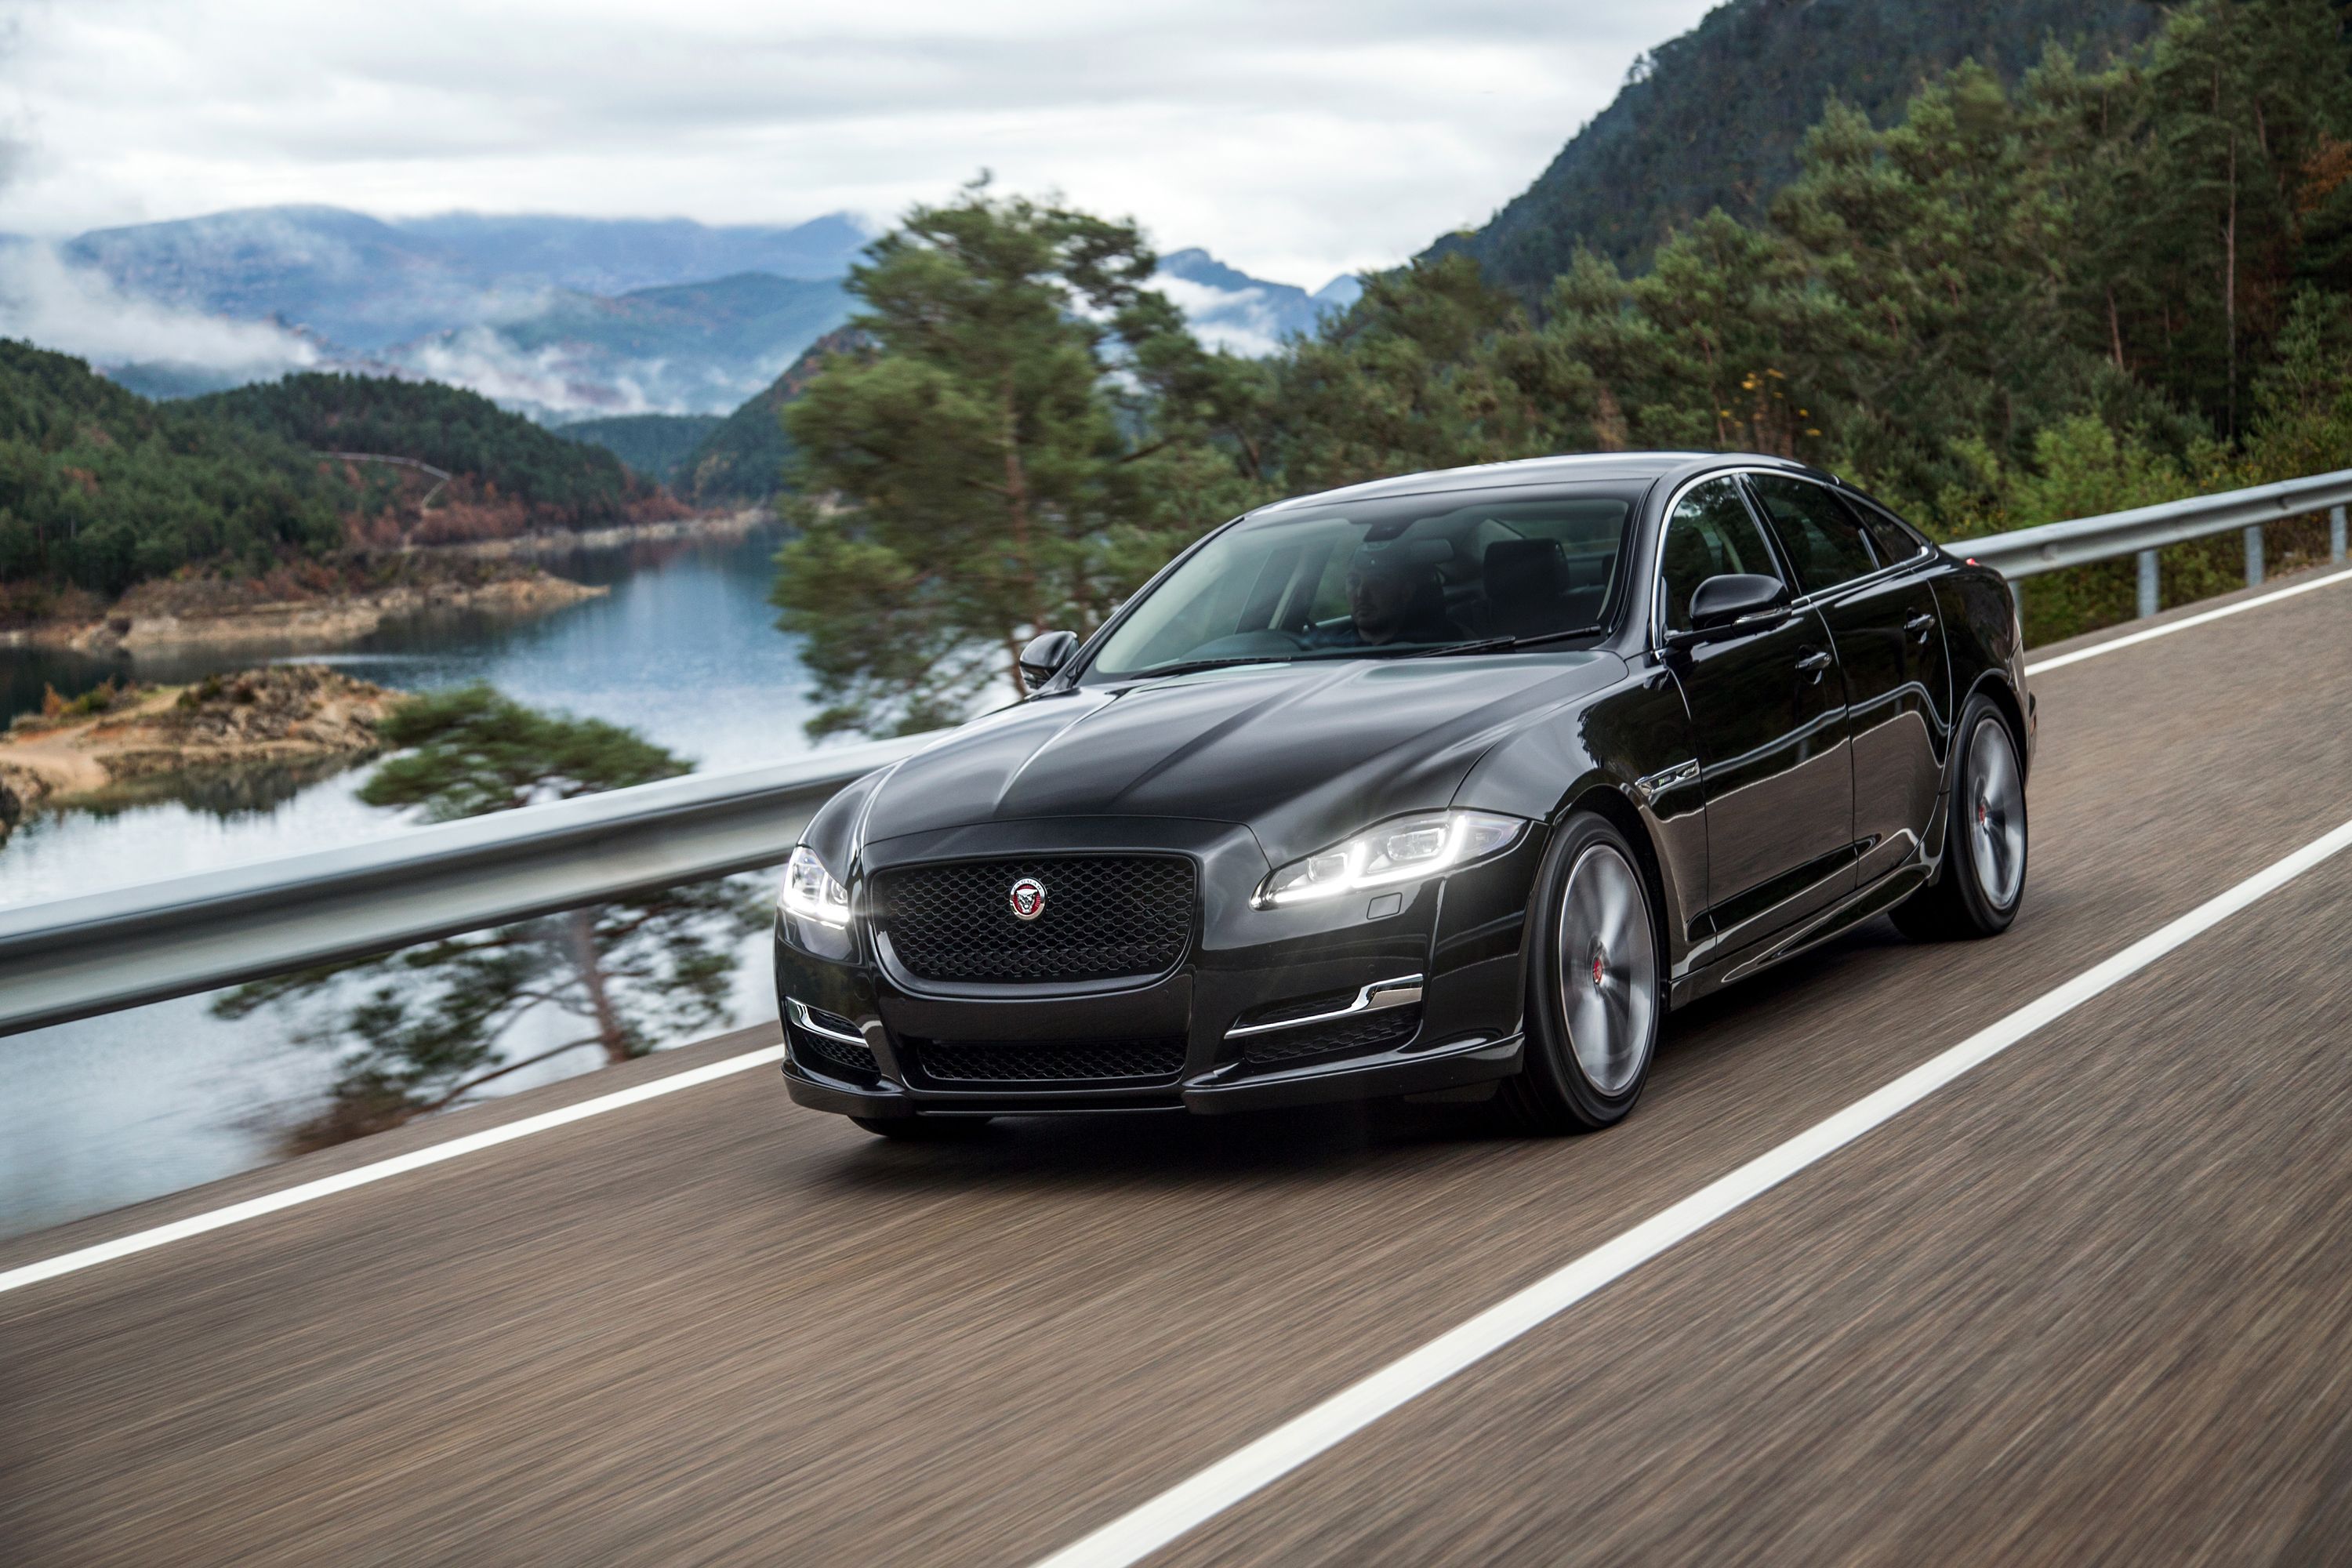 2021 The Jaguar XJ is Dead, and The Rest of the Lineup Might Follow